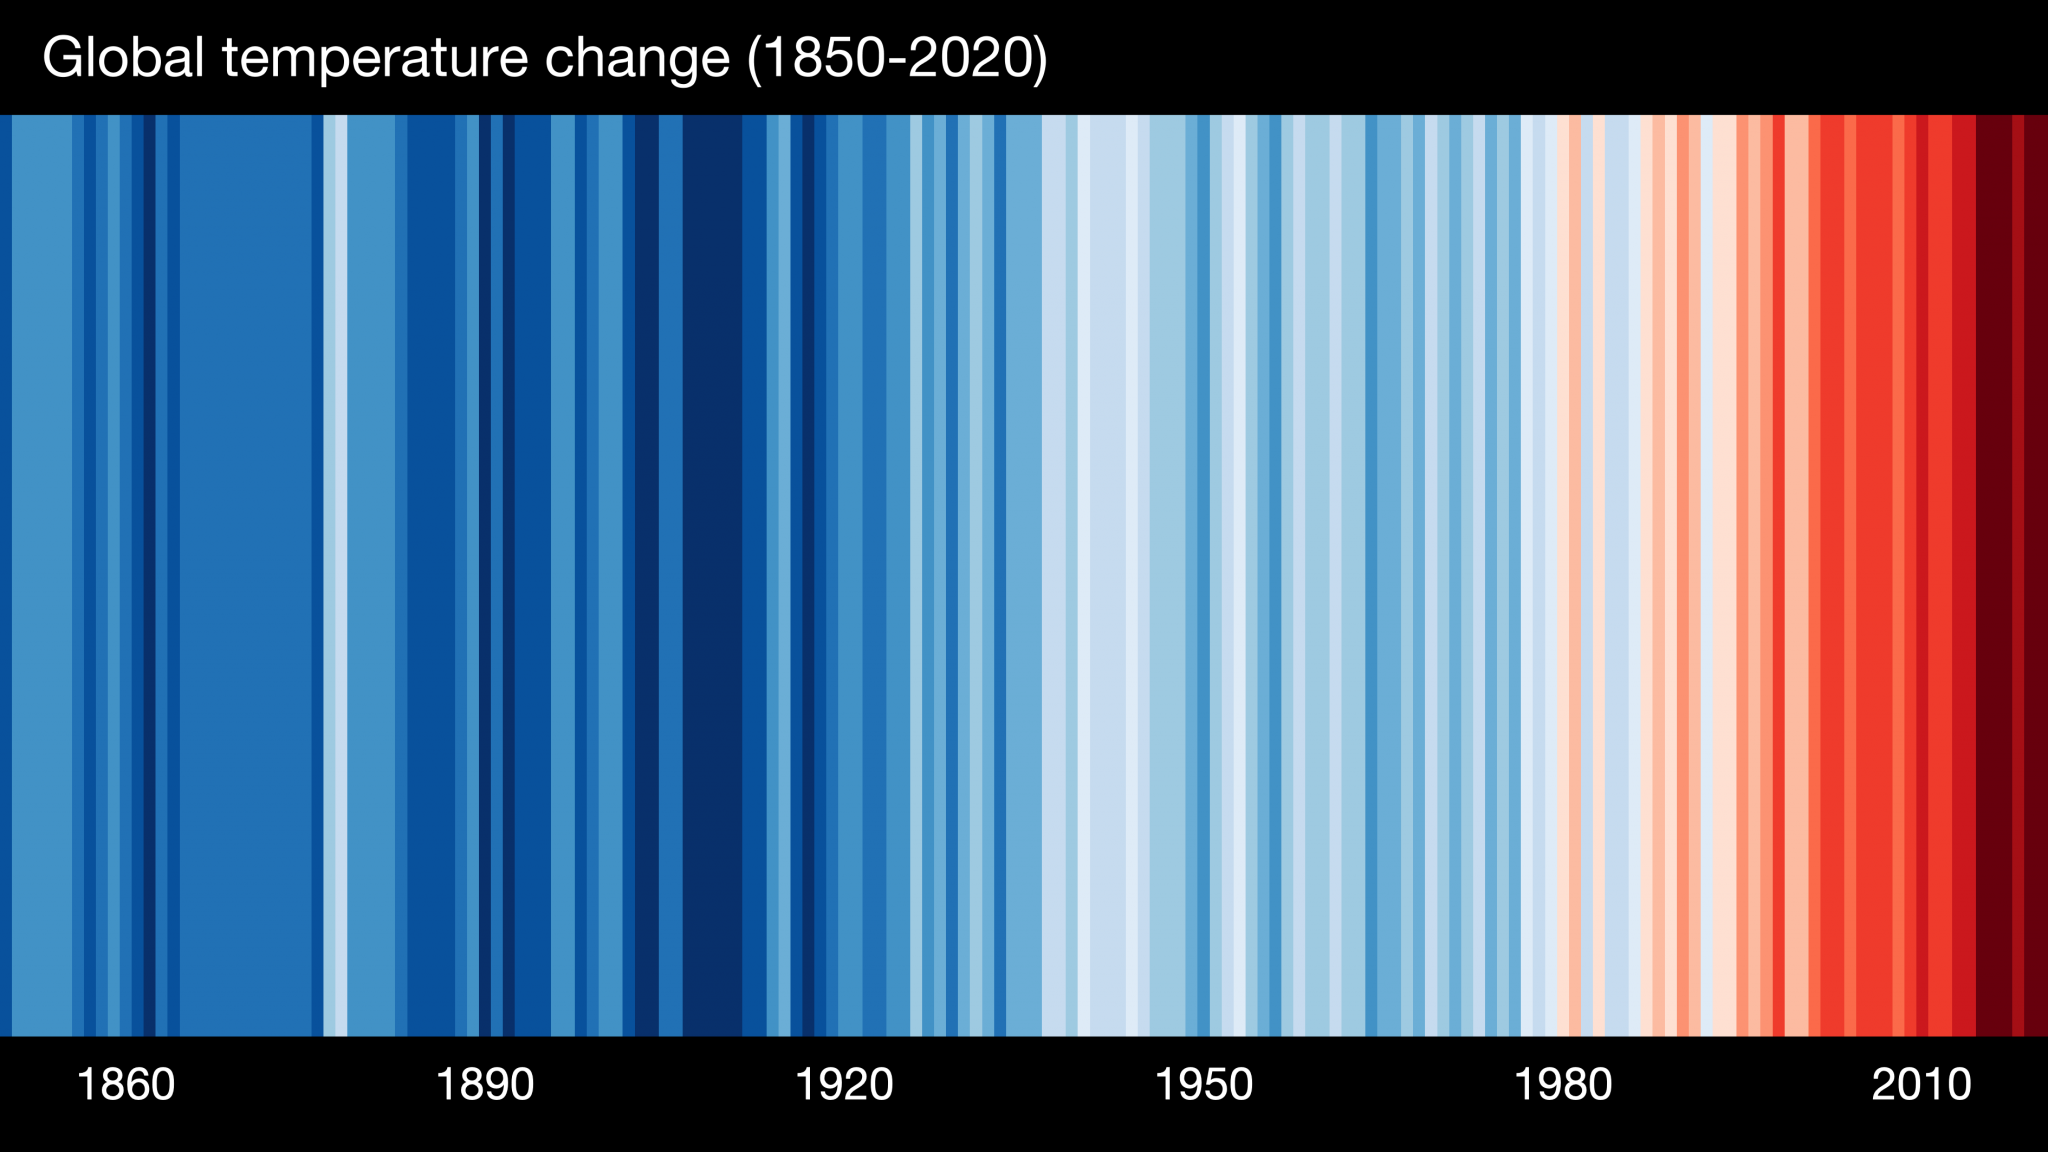 Vertical stripes of colour denoting the changing global temperature starting with blues and fading to dark reds